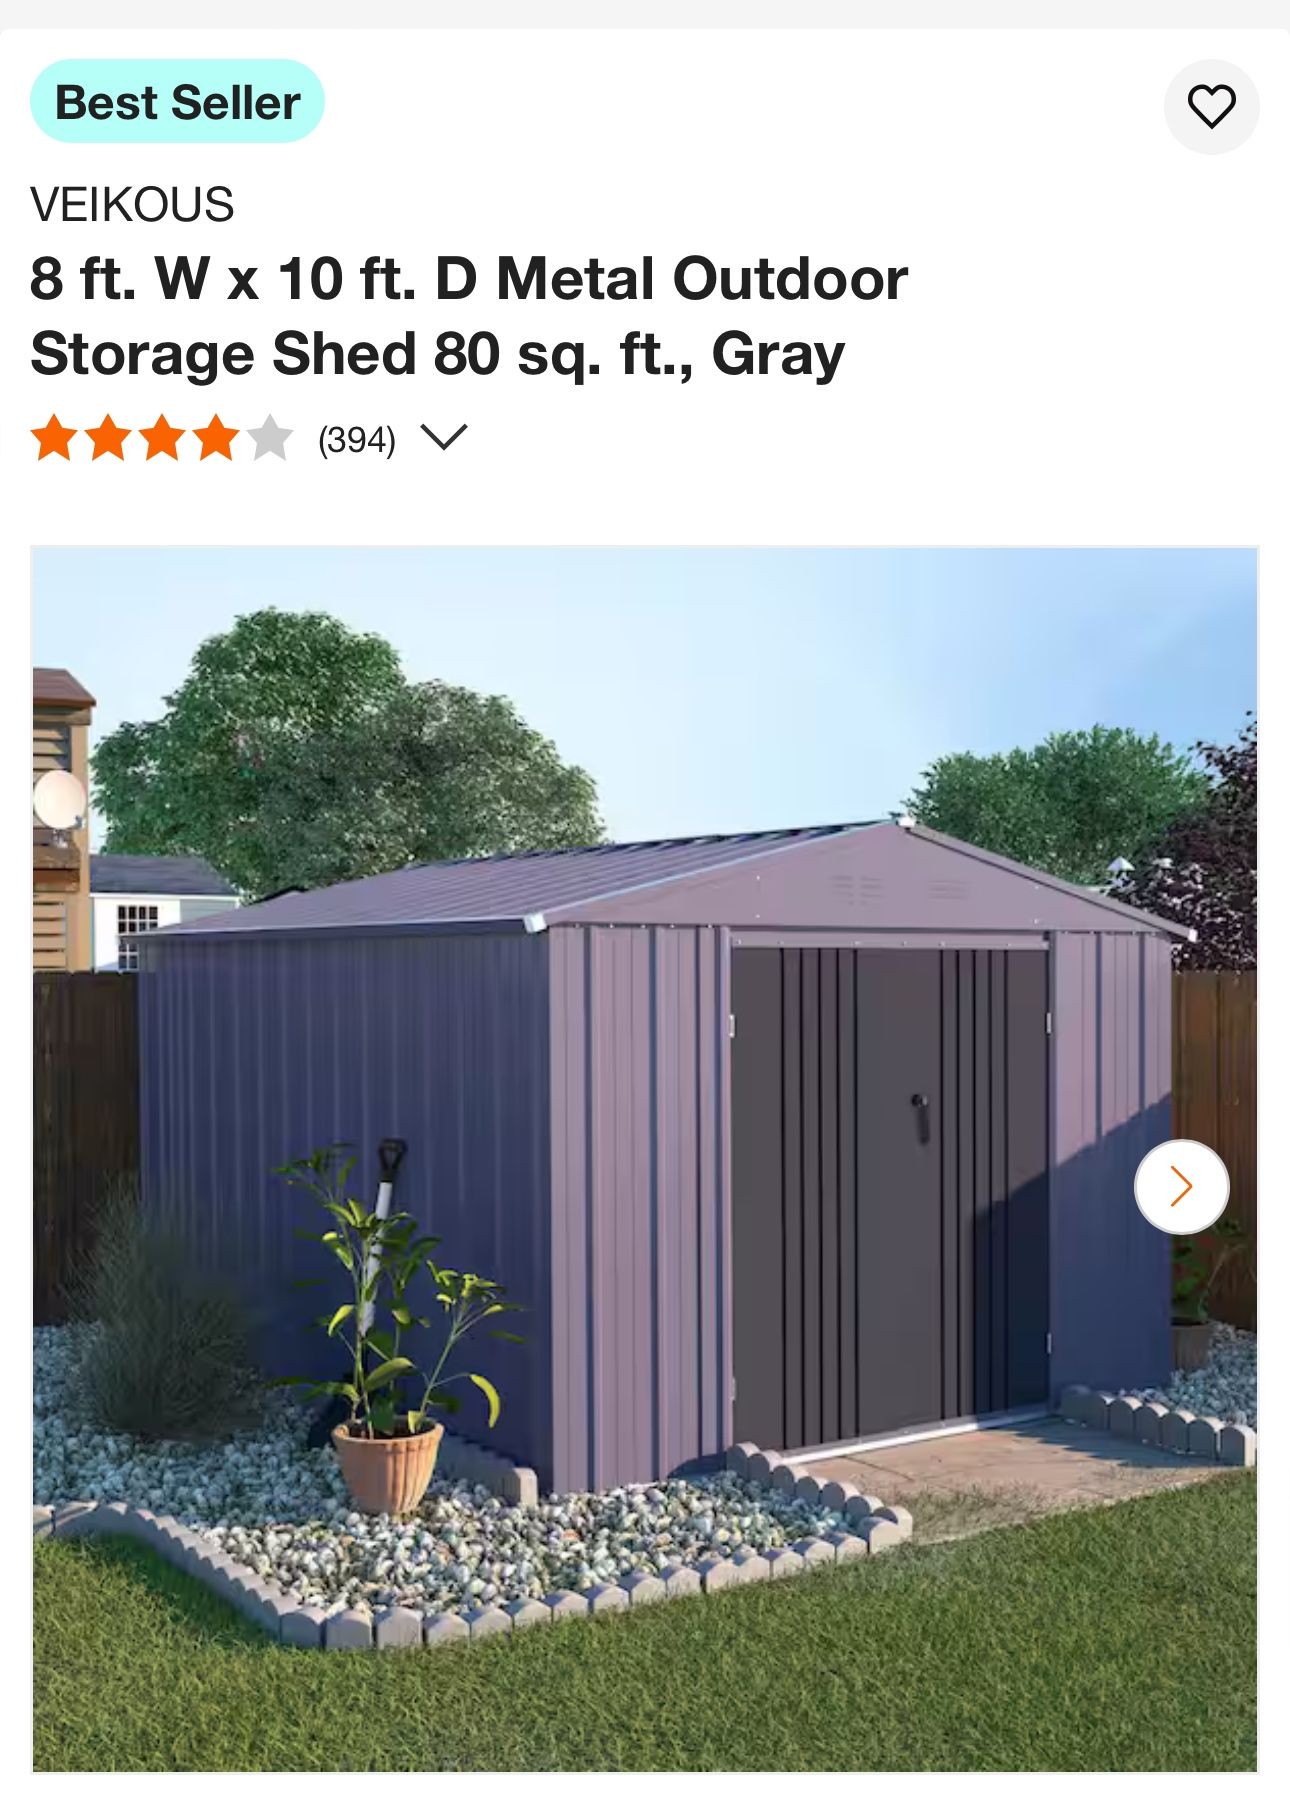 VEIKOUS 8 ft. W x 10 ft. D Metal Outdoor Storage Shed 80 sq. ft., Gray